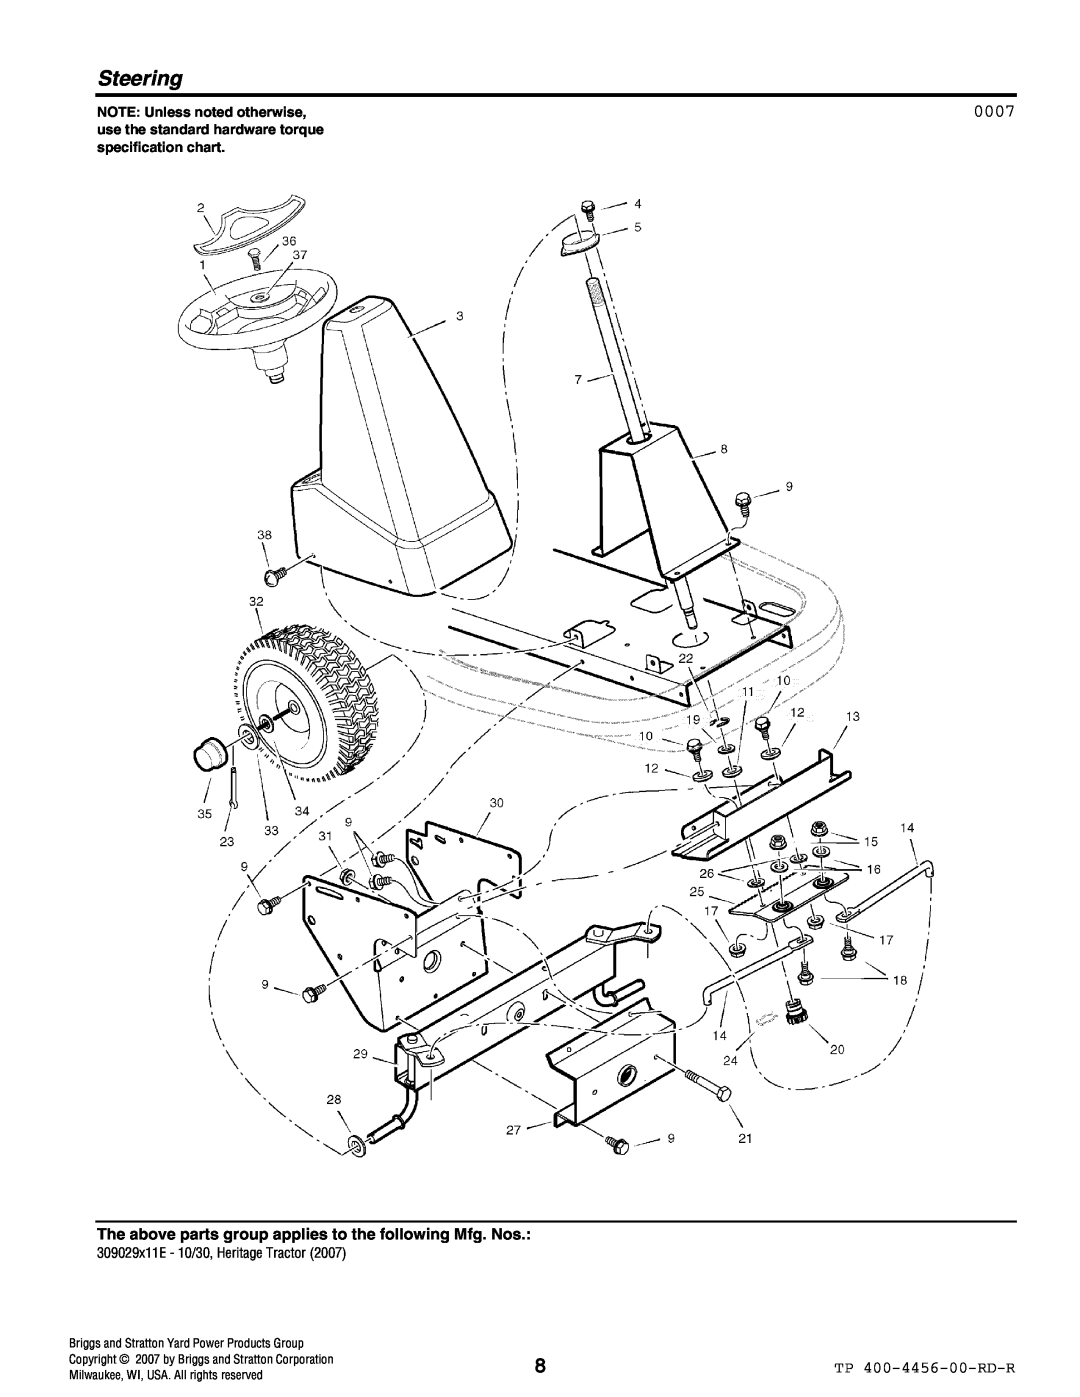 Hayter Mowers 10/30 manual Steering, 0007, TP 400-4456-00-RD-R, NOTE: Unless noted otherwise 